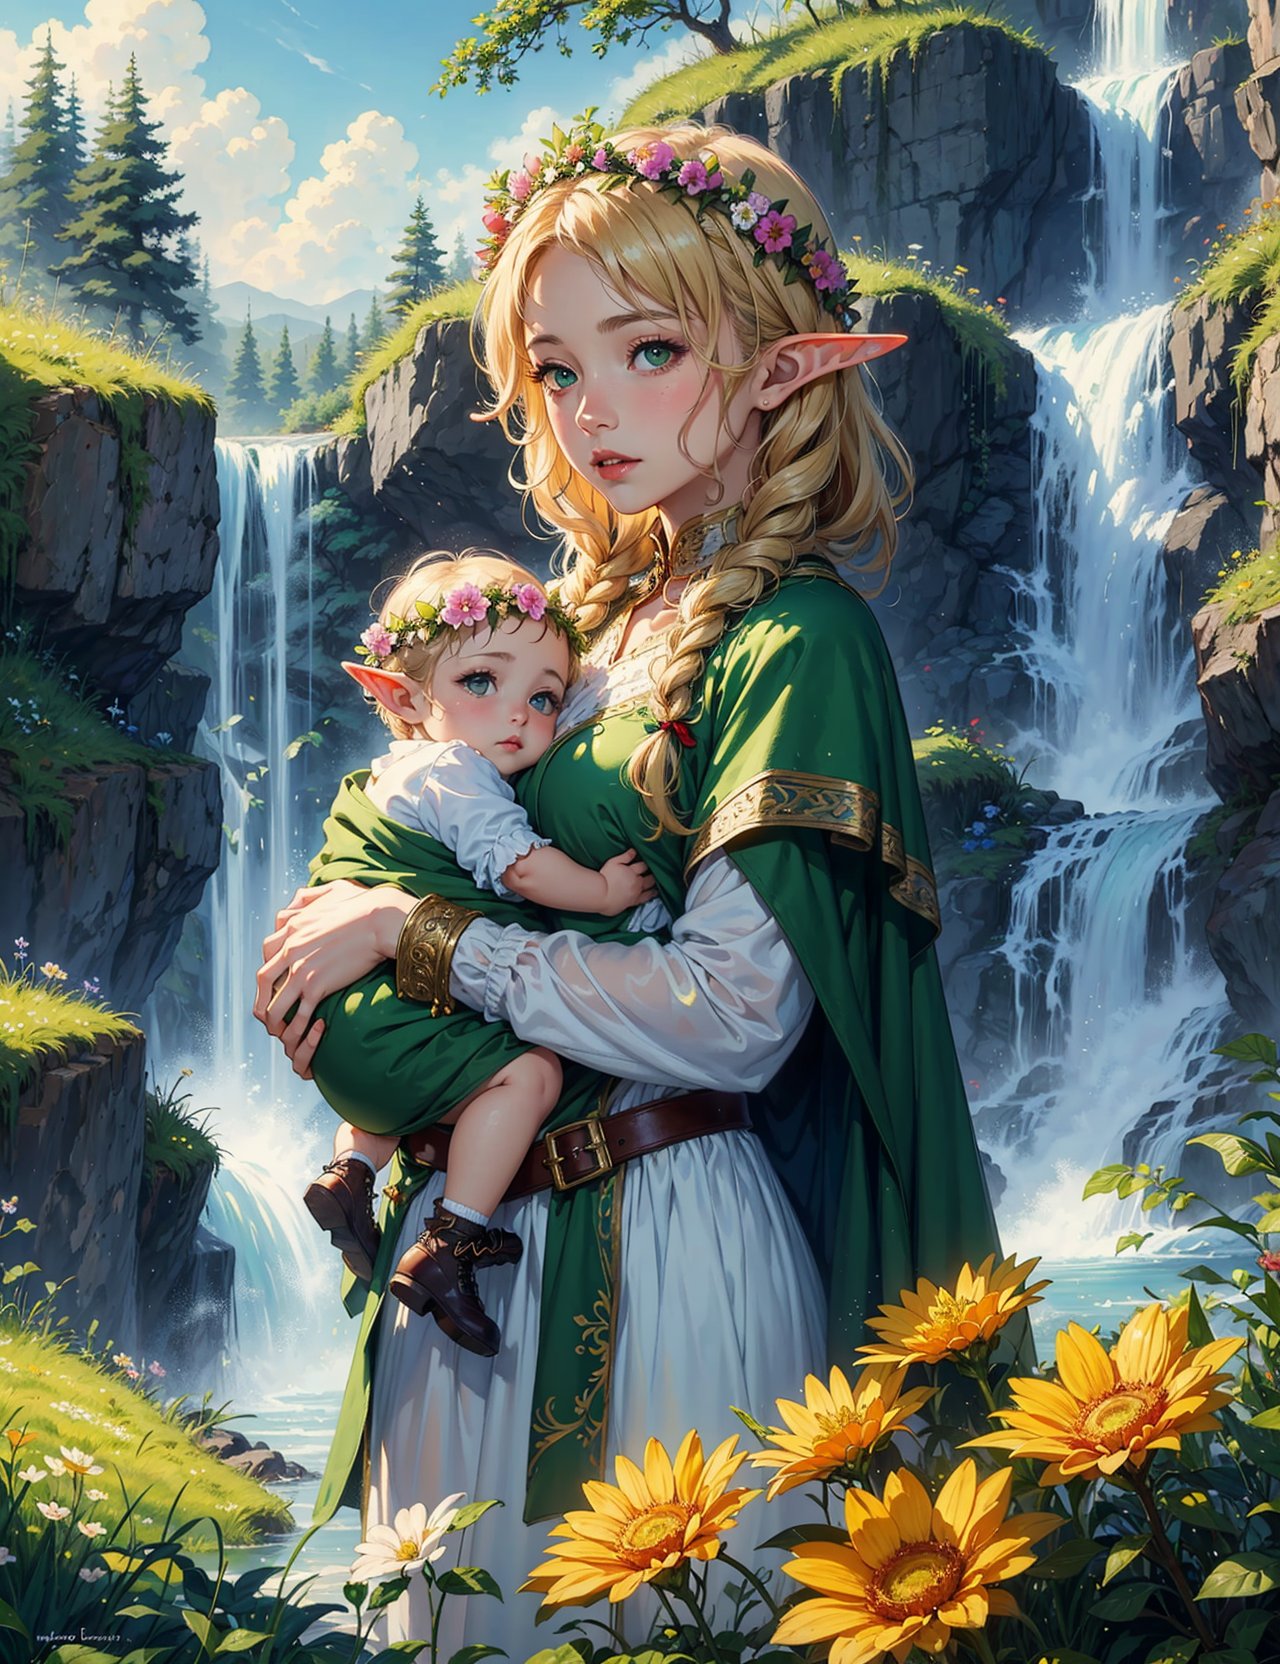 masterpiece, best quality,a detailed ilustration of a female elf druid with a cloak made with grass and flowers, with a baby in arms, short golden hair with a flower crown, bright green eyes, masterpiece, fantasy, delicate, iridescent, waterfall background, 4k, watercolors,intricate details, perfect skin